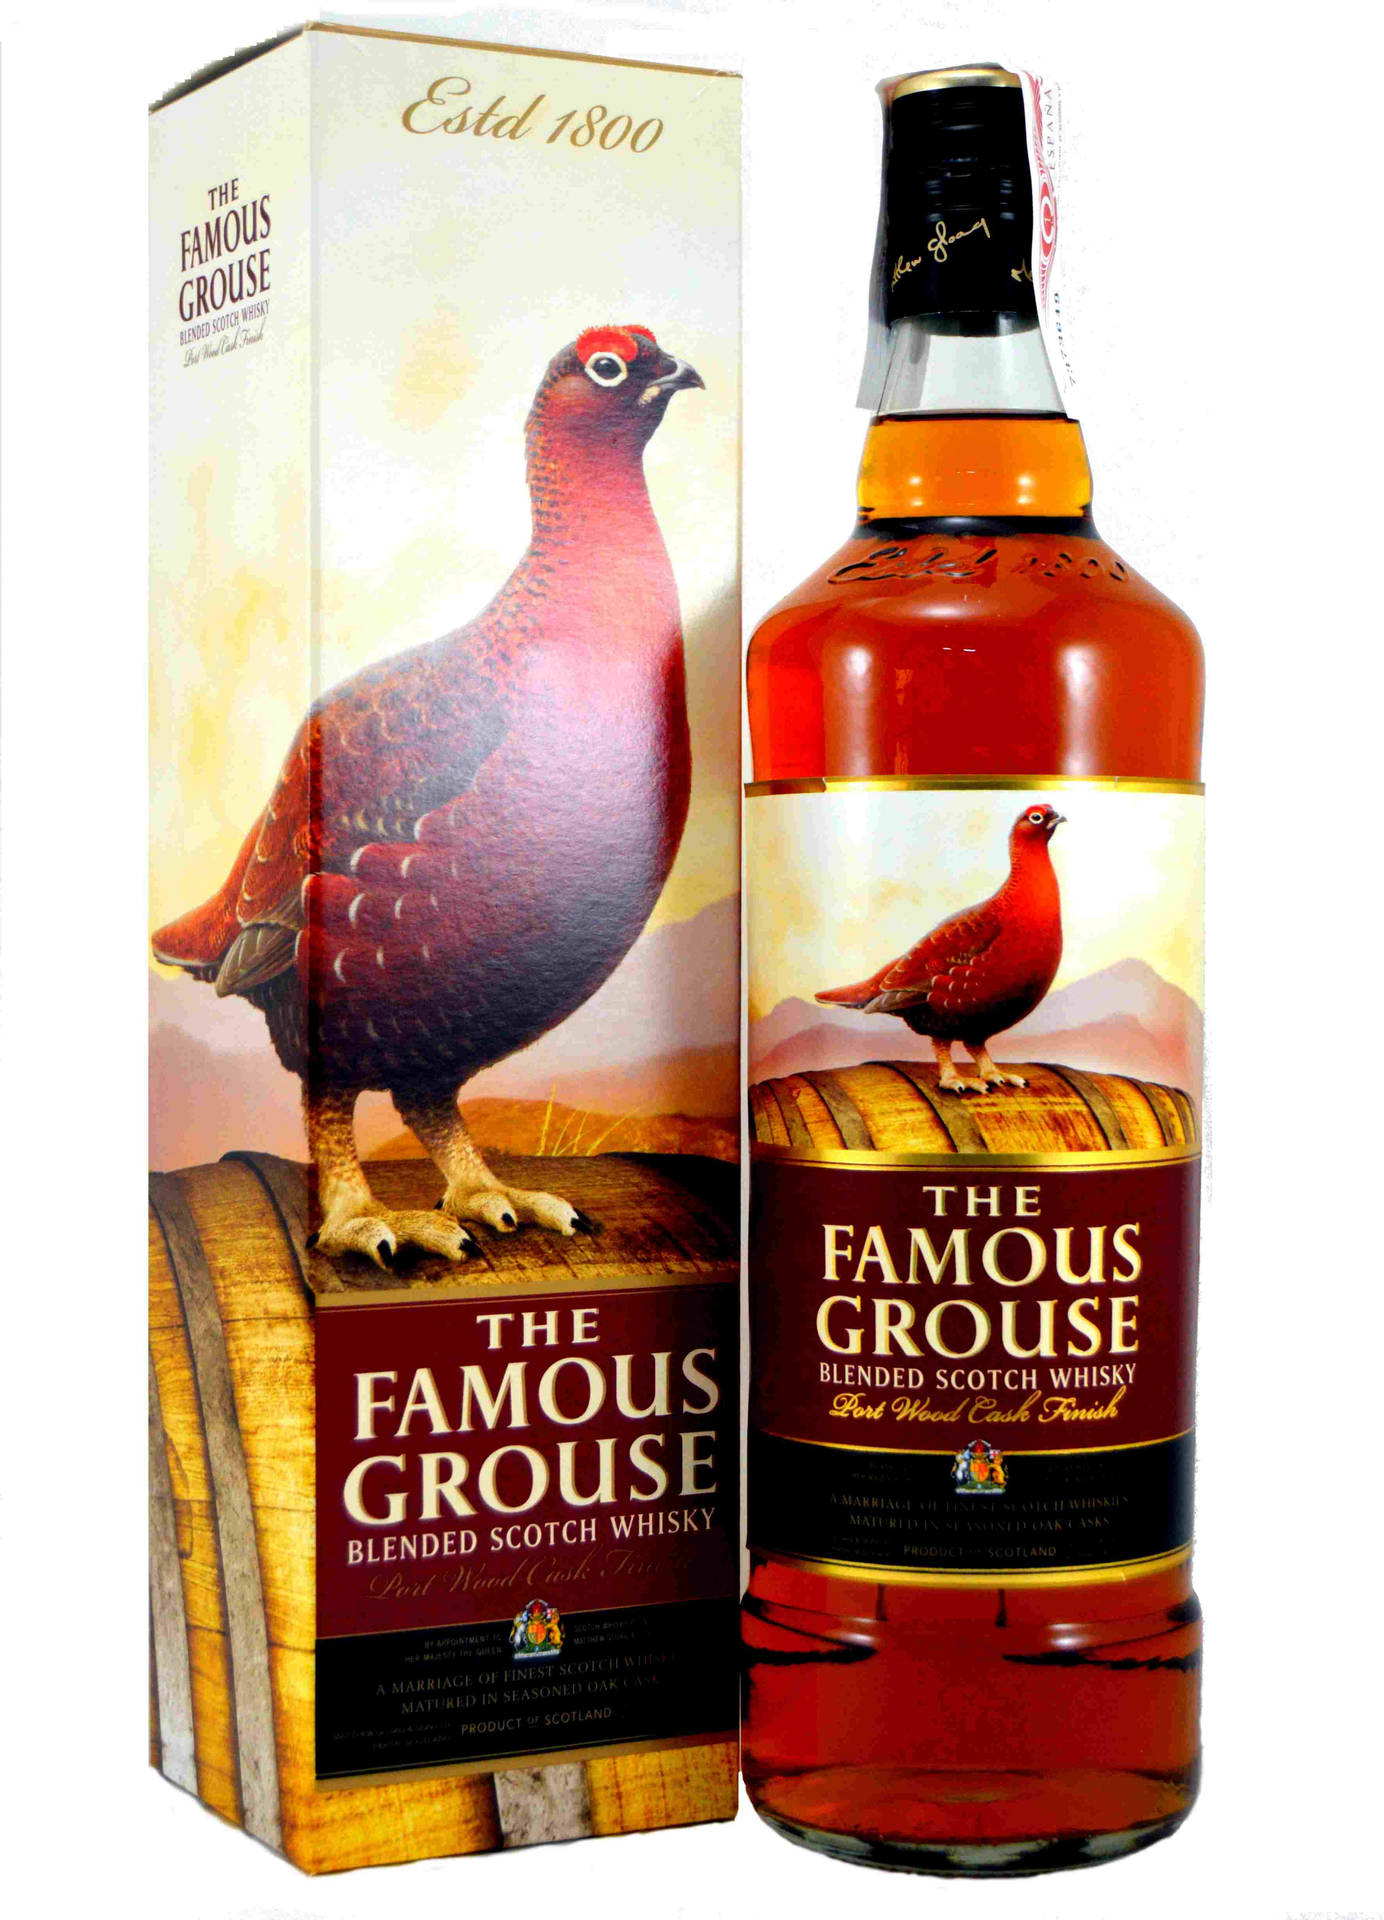 1800famous Grouse Blended Scotch Is Not A Sentence Related To Computer Or Mobile Wallpaper. Please Provide A Sentence Or Phrase Related To This Topic, And I Would Be Happy To Translate It For You. Wallpaper